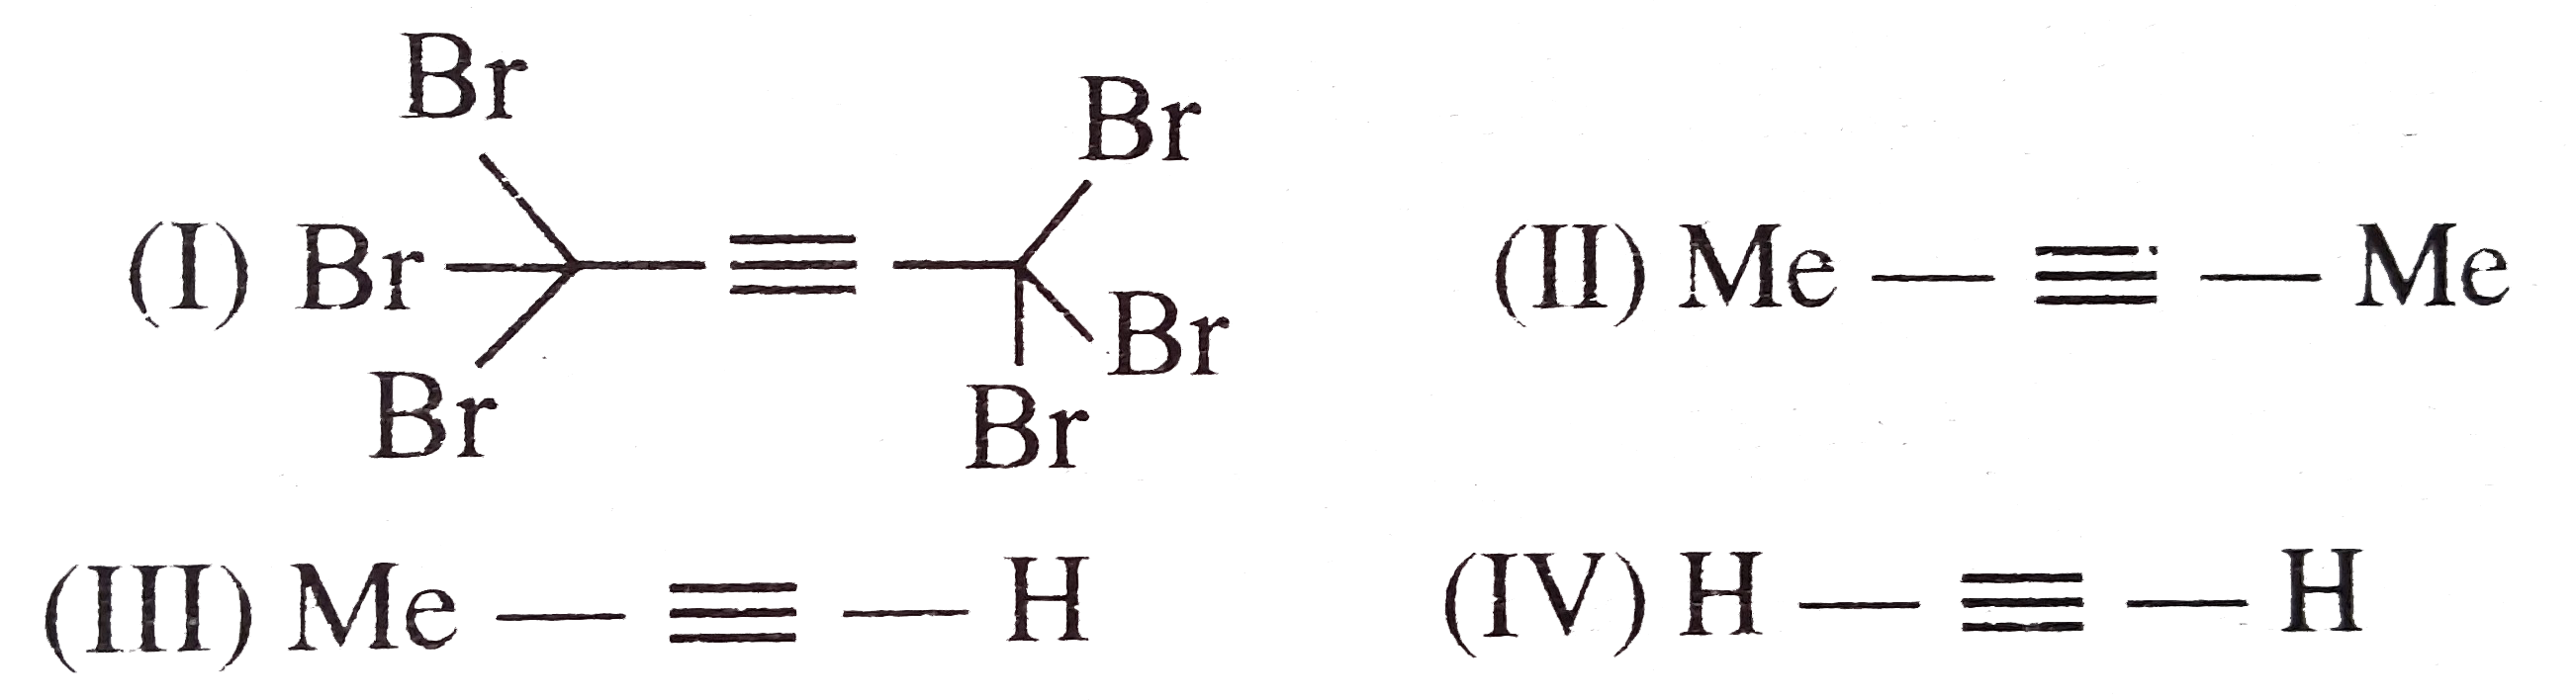 Give the reactivity in the decreasing order of the following alkynes towards nucleophilic addition reaction with MeO^(Θ)//MeOH.   (I)